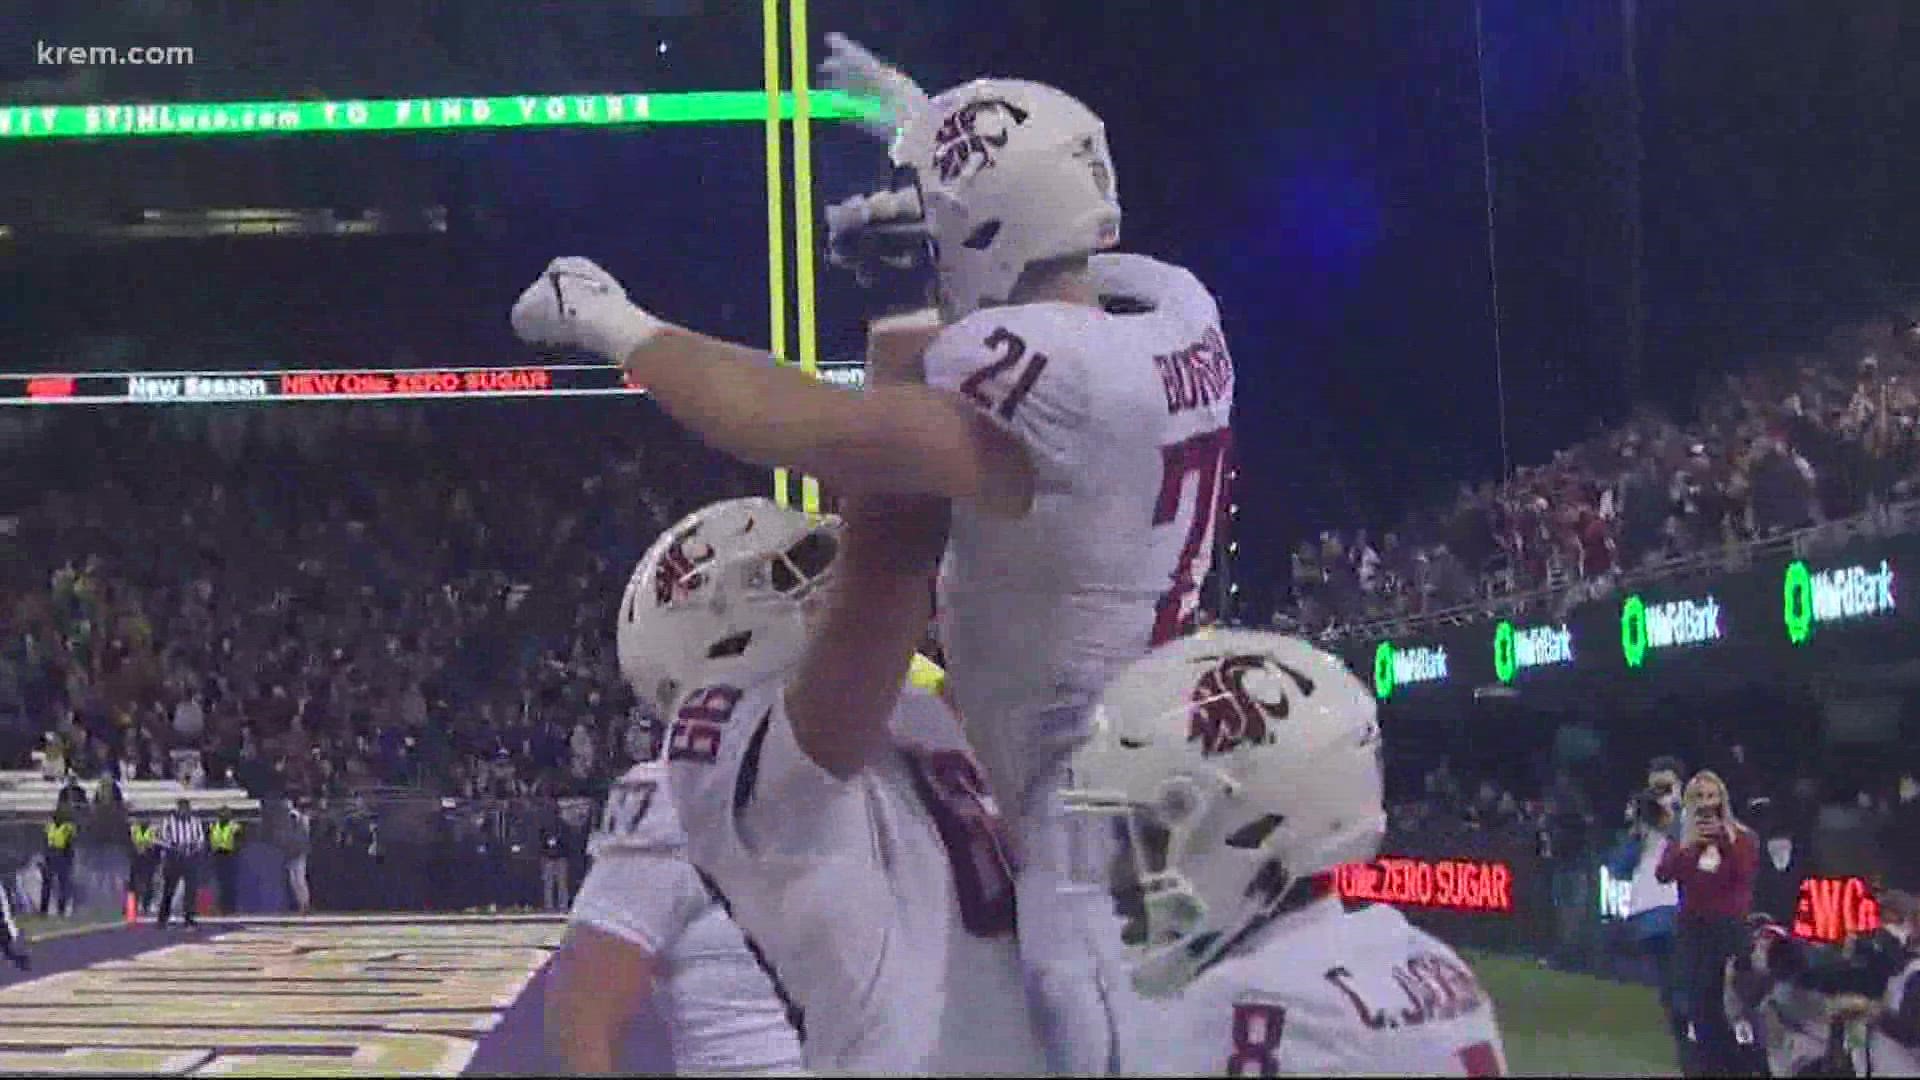 Washington State football got its first Apple Cup victory since 2012, topping Washington 40-13.